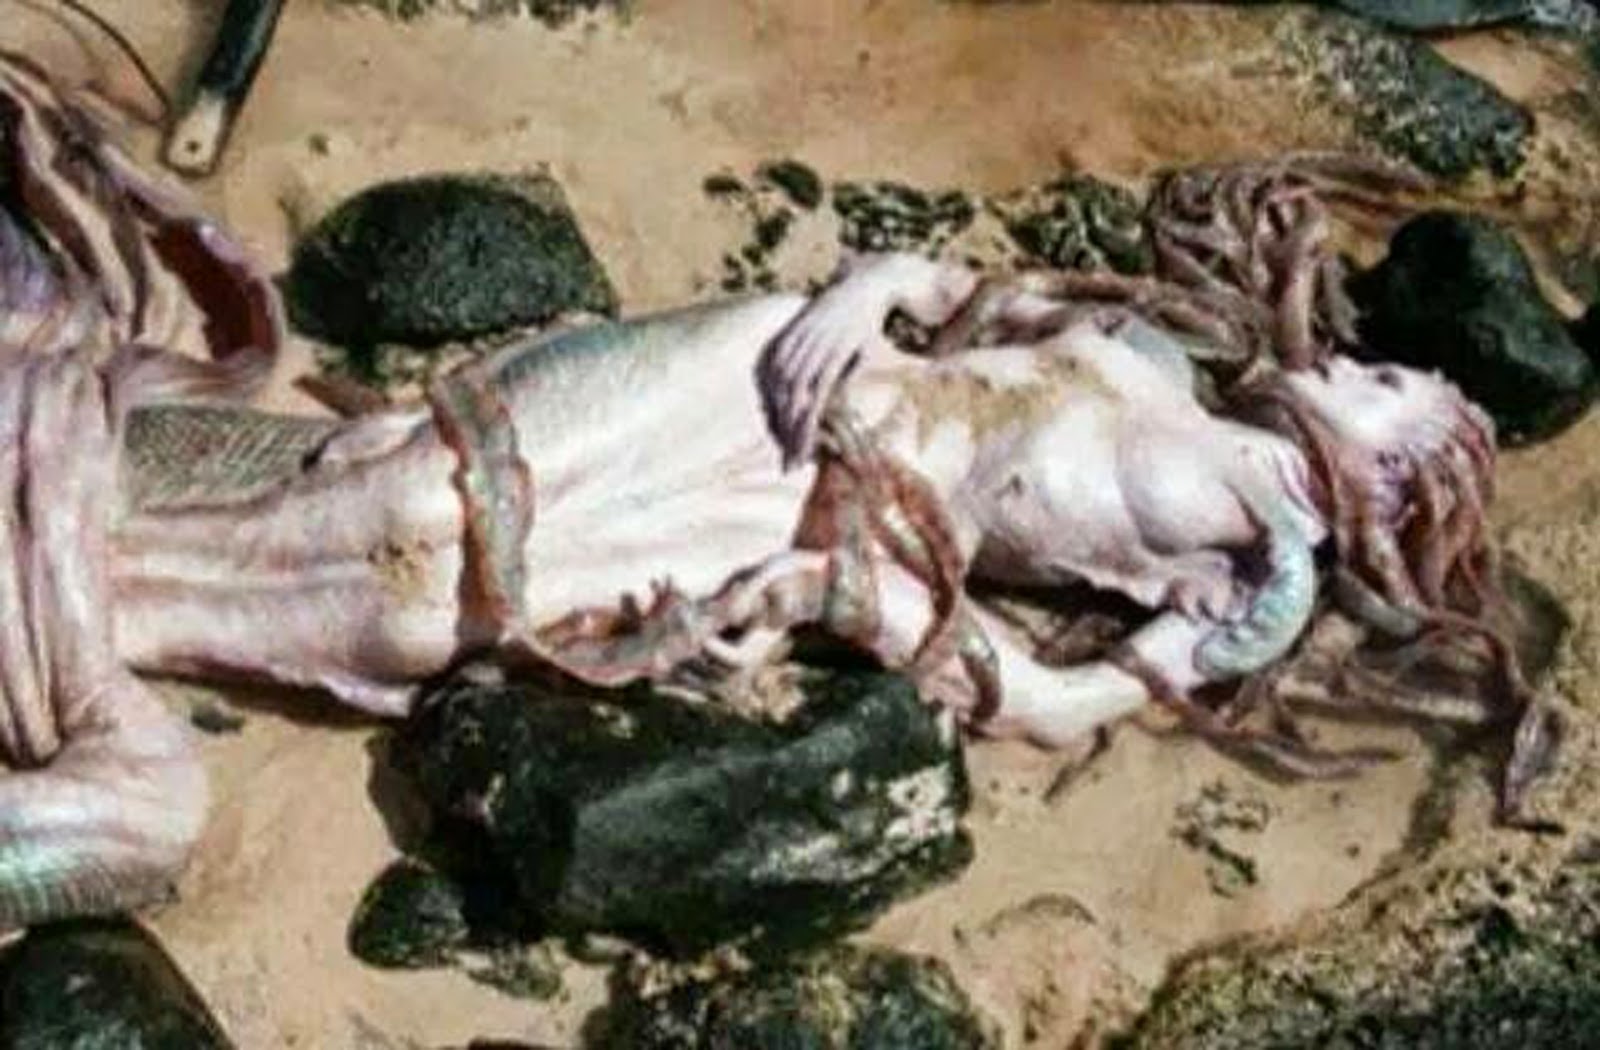 Mermaid was allegedly caught, fake or real?  XOLXOL